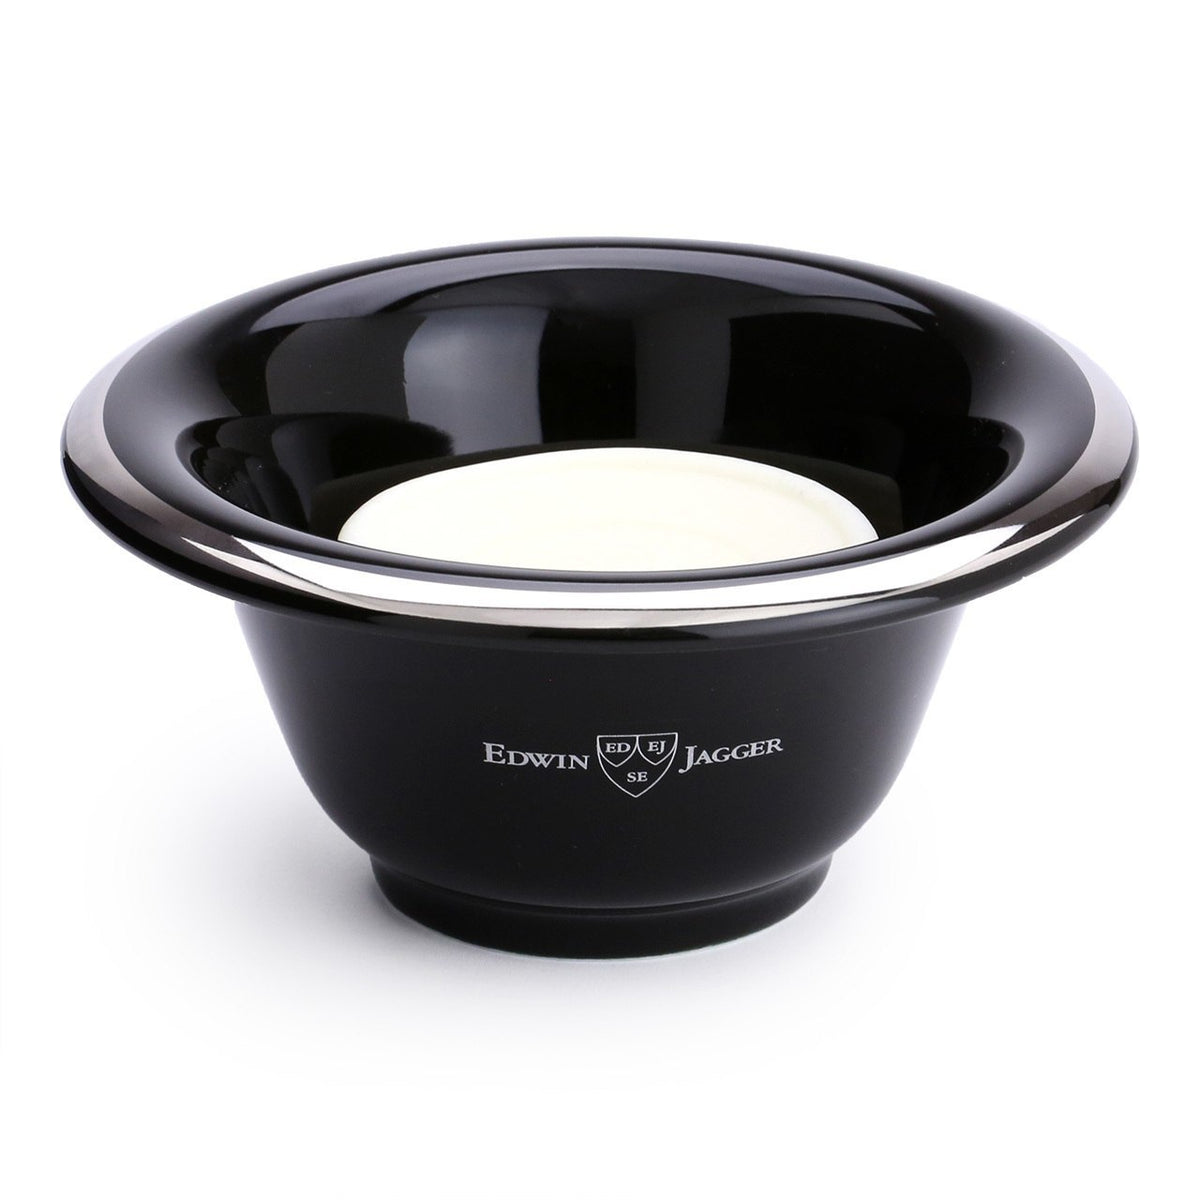 Edwin Jagger Black Lather Bowl with a puck of shave soap fitting neatly inside - soap bought separately